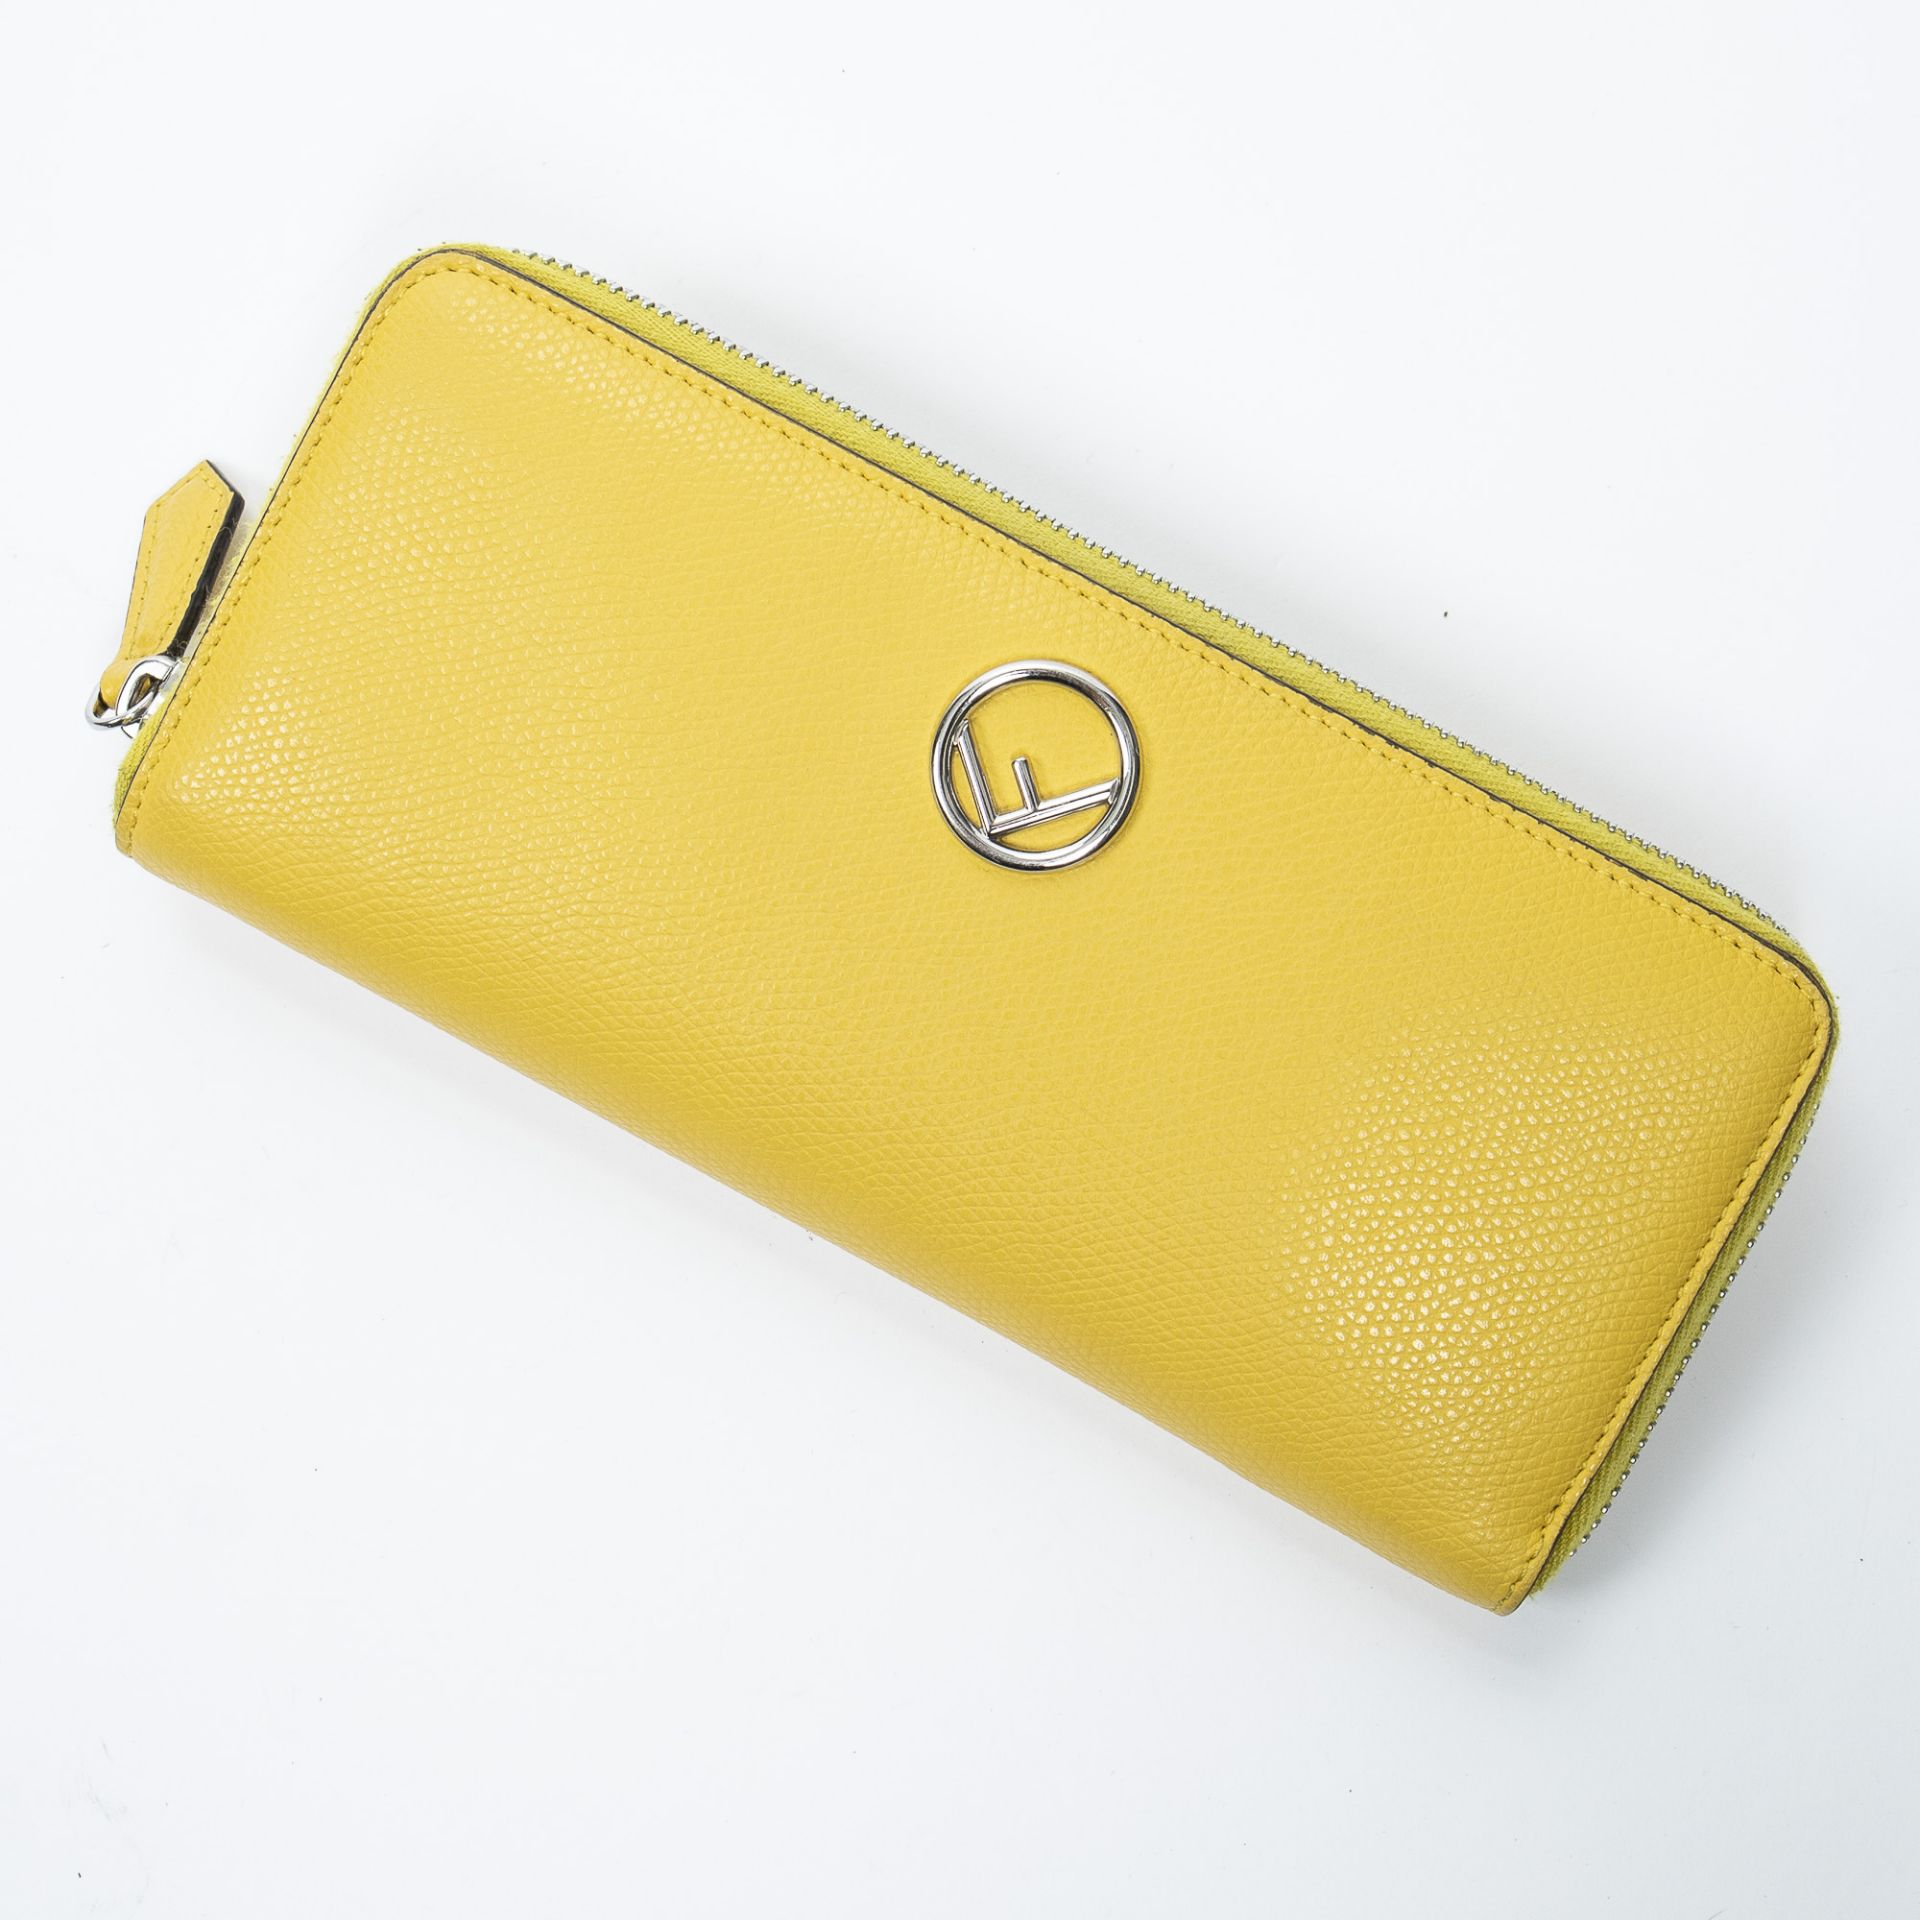 RRP £775.00 Lot To Contain 1 Fendi Calf Leather Slim Zip Around Wallet In Yellow - 20*9*2cm - A -